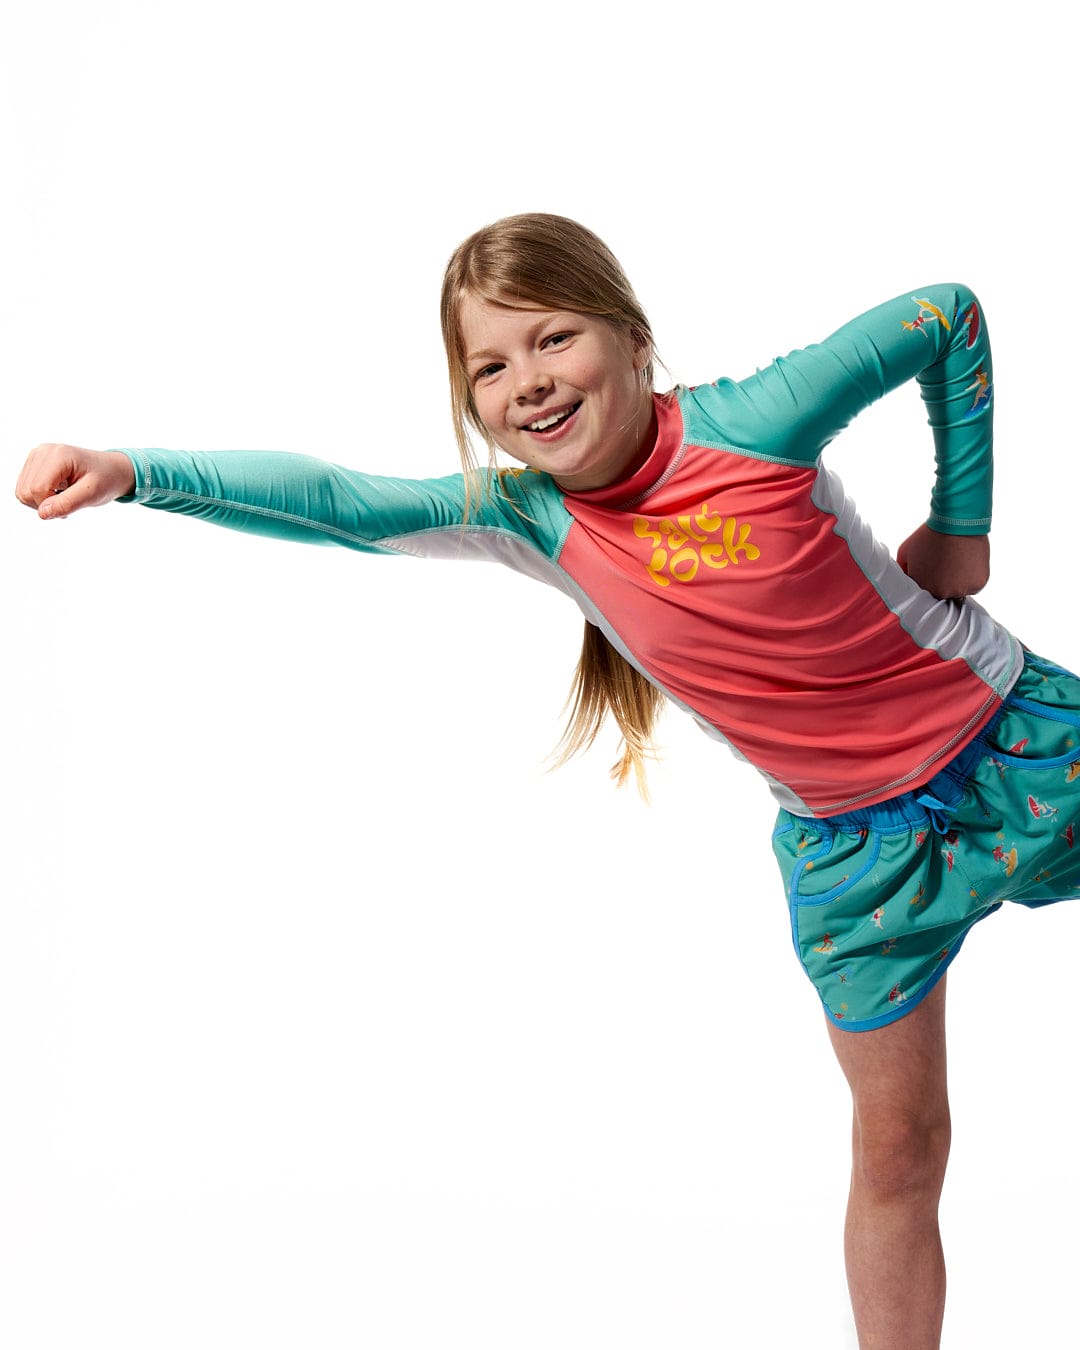 A young girl is posing for a photo wearing the Surf Sister - Kids Long Sleeve Rashvest in Coral/Turquoise by Saltrock.